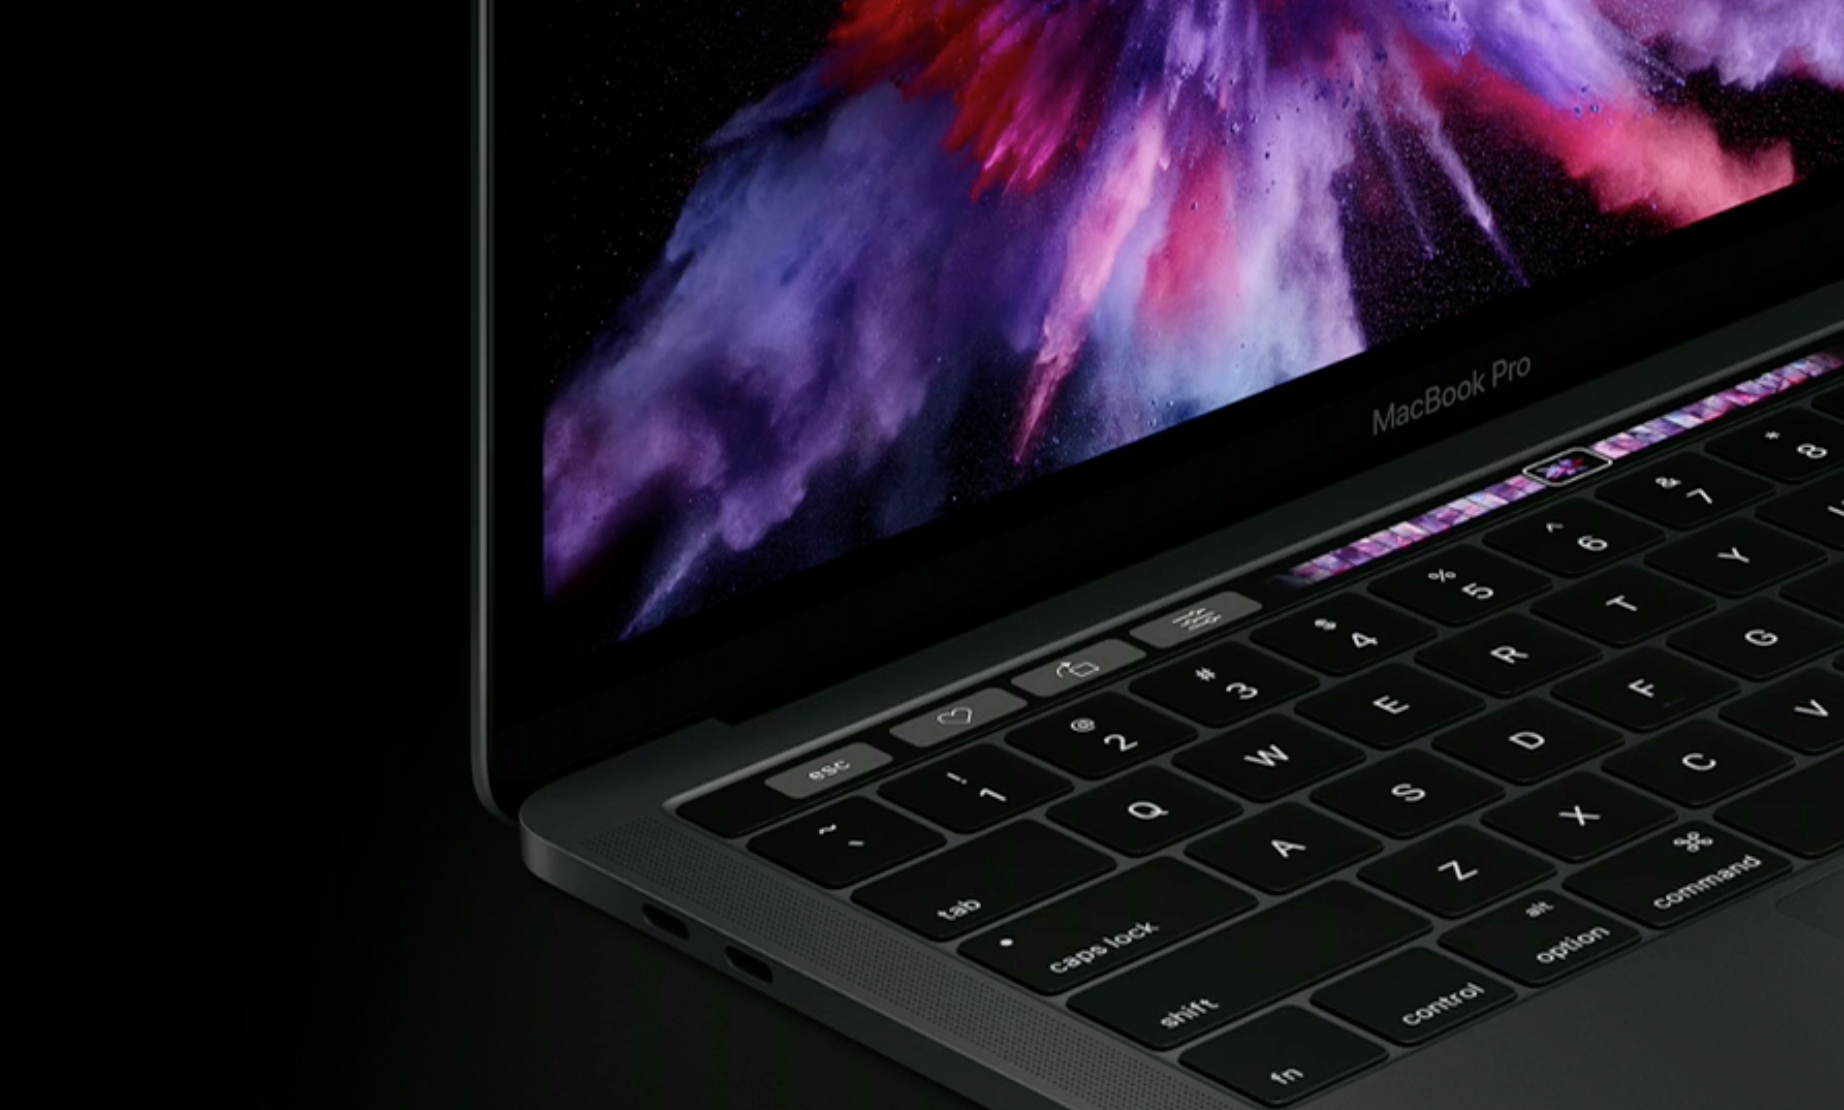 MacbookPro2016 - Apple announces a redesigned MacBook Pro with an all new Touch Bar